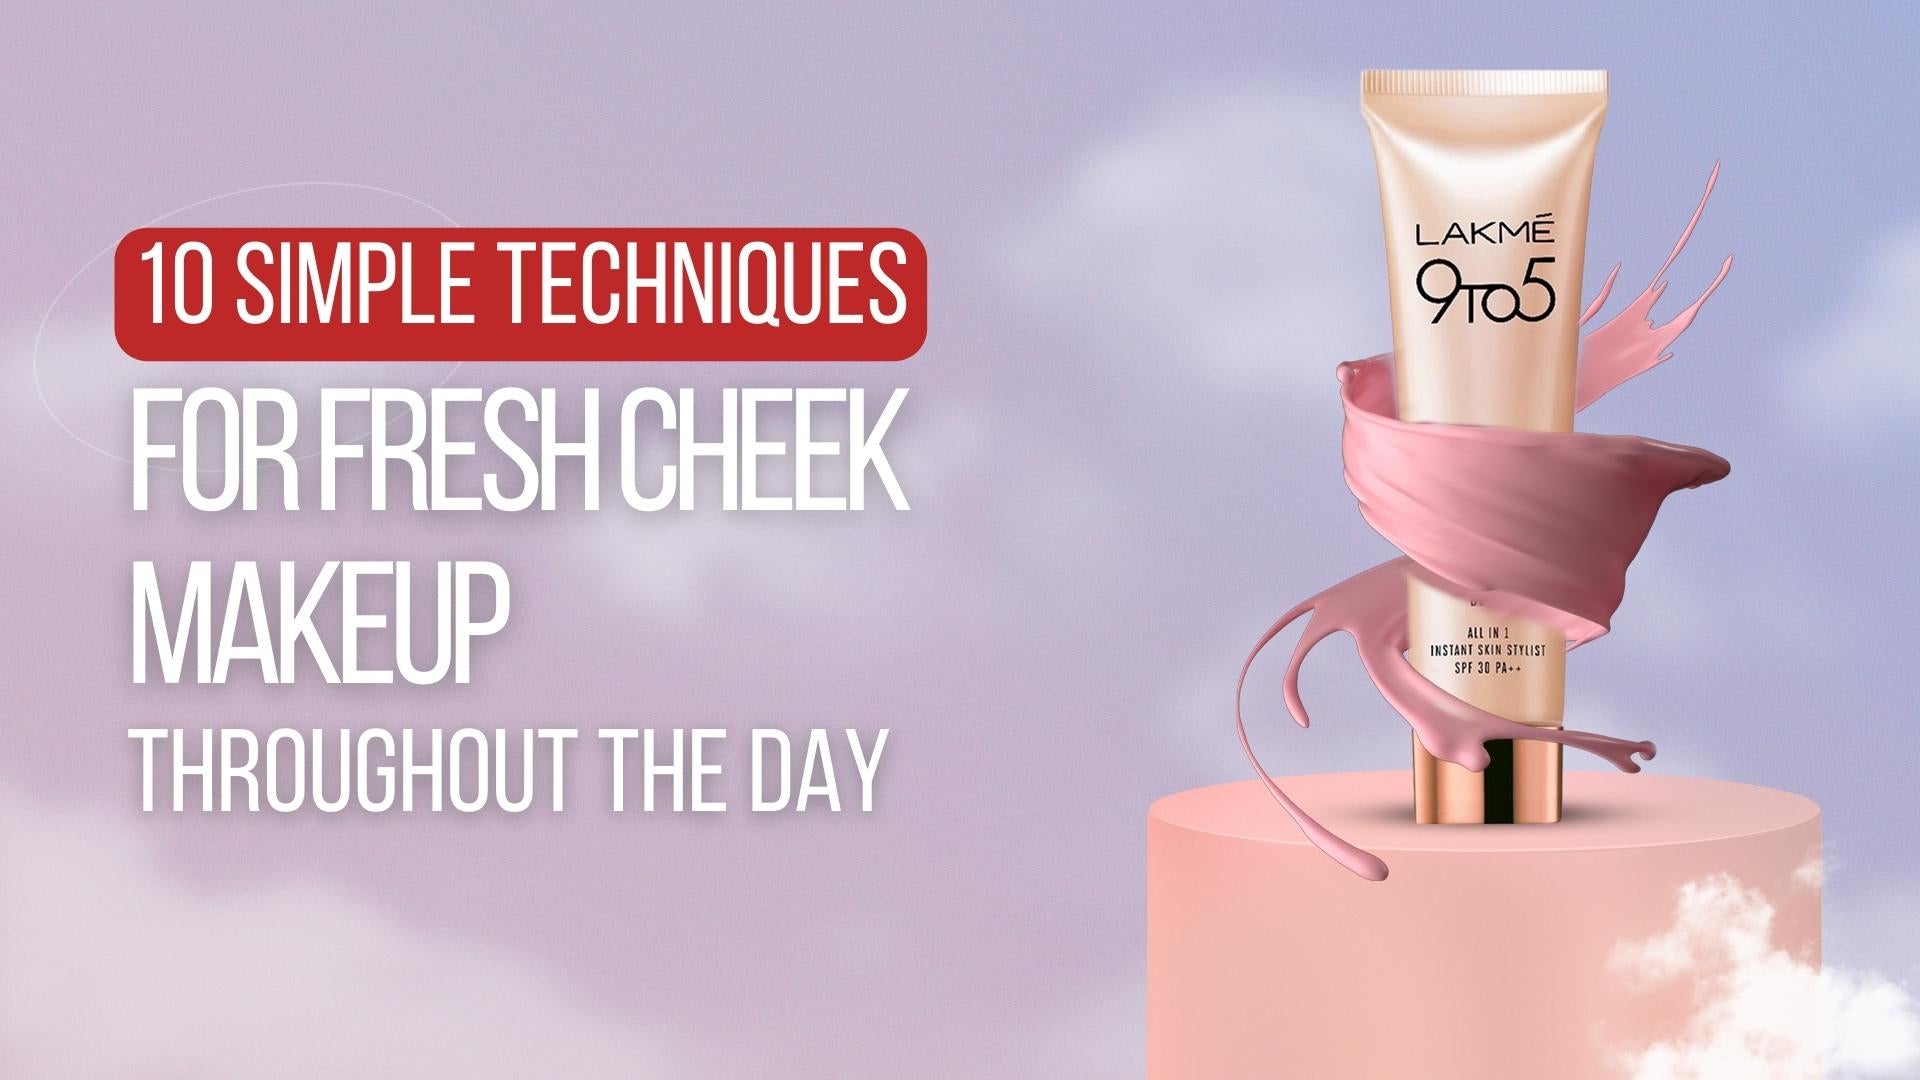 10 Simple Techniques for Fresh Cheek Makeup Throughout the Day